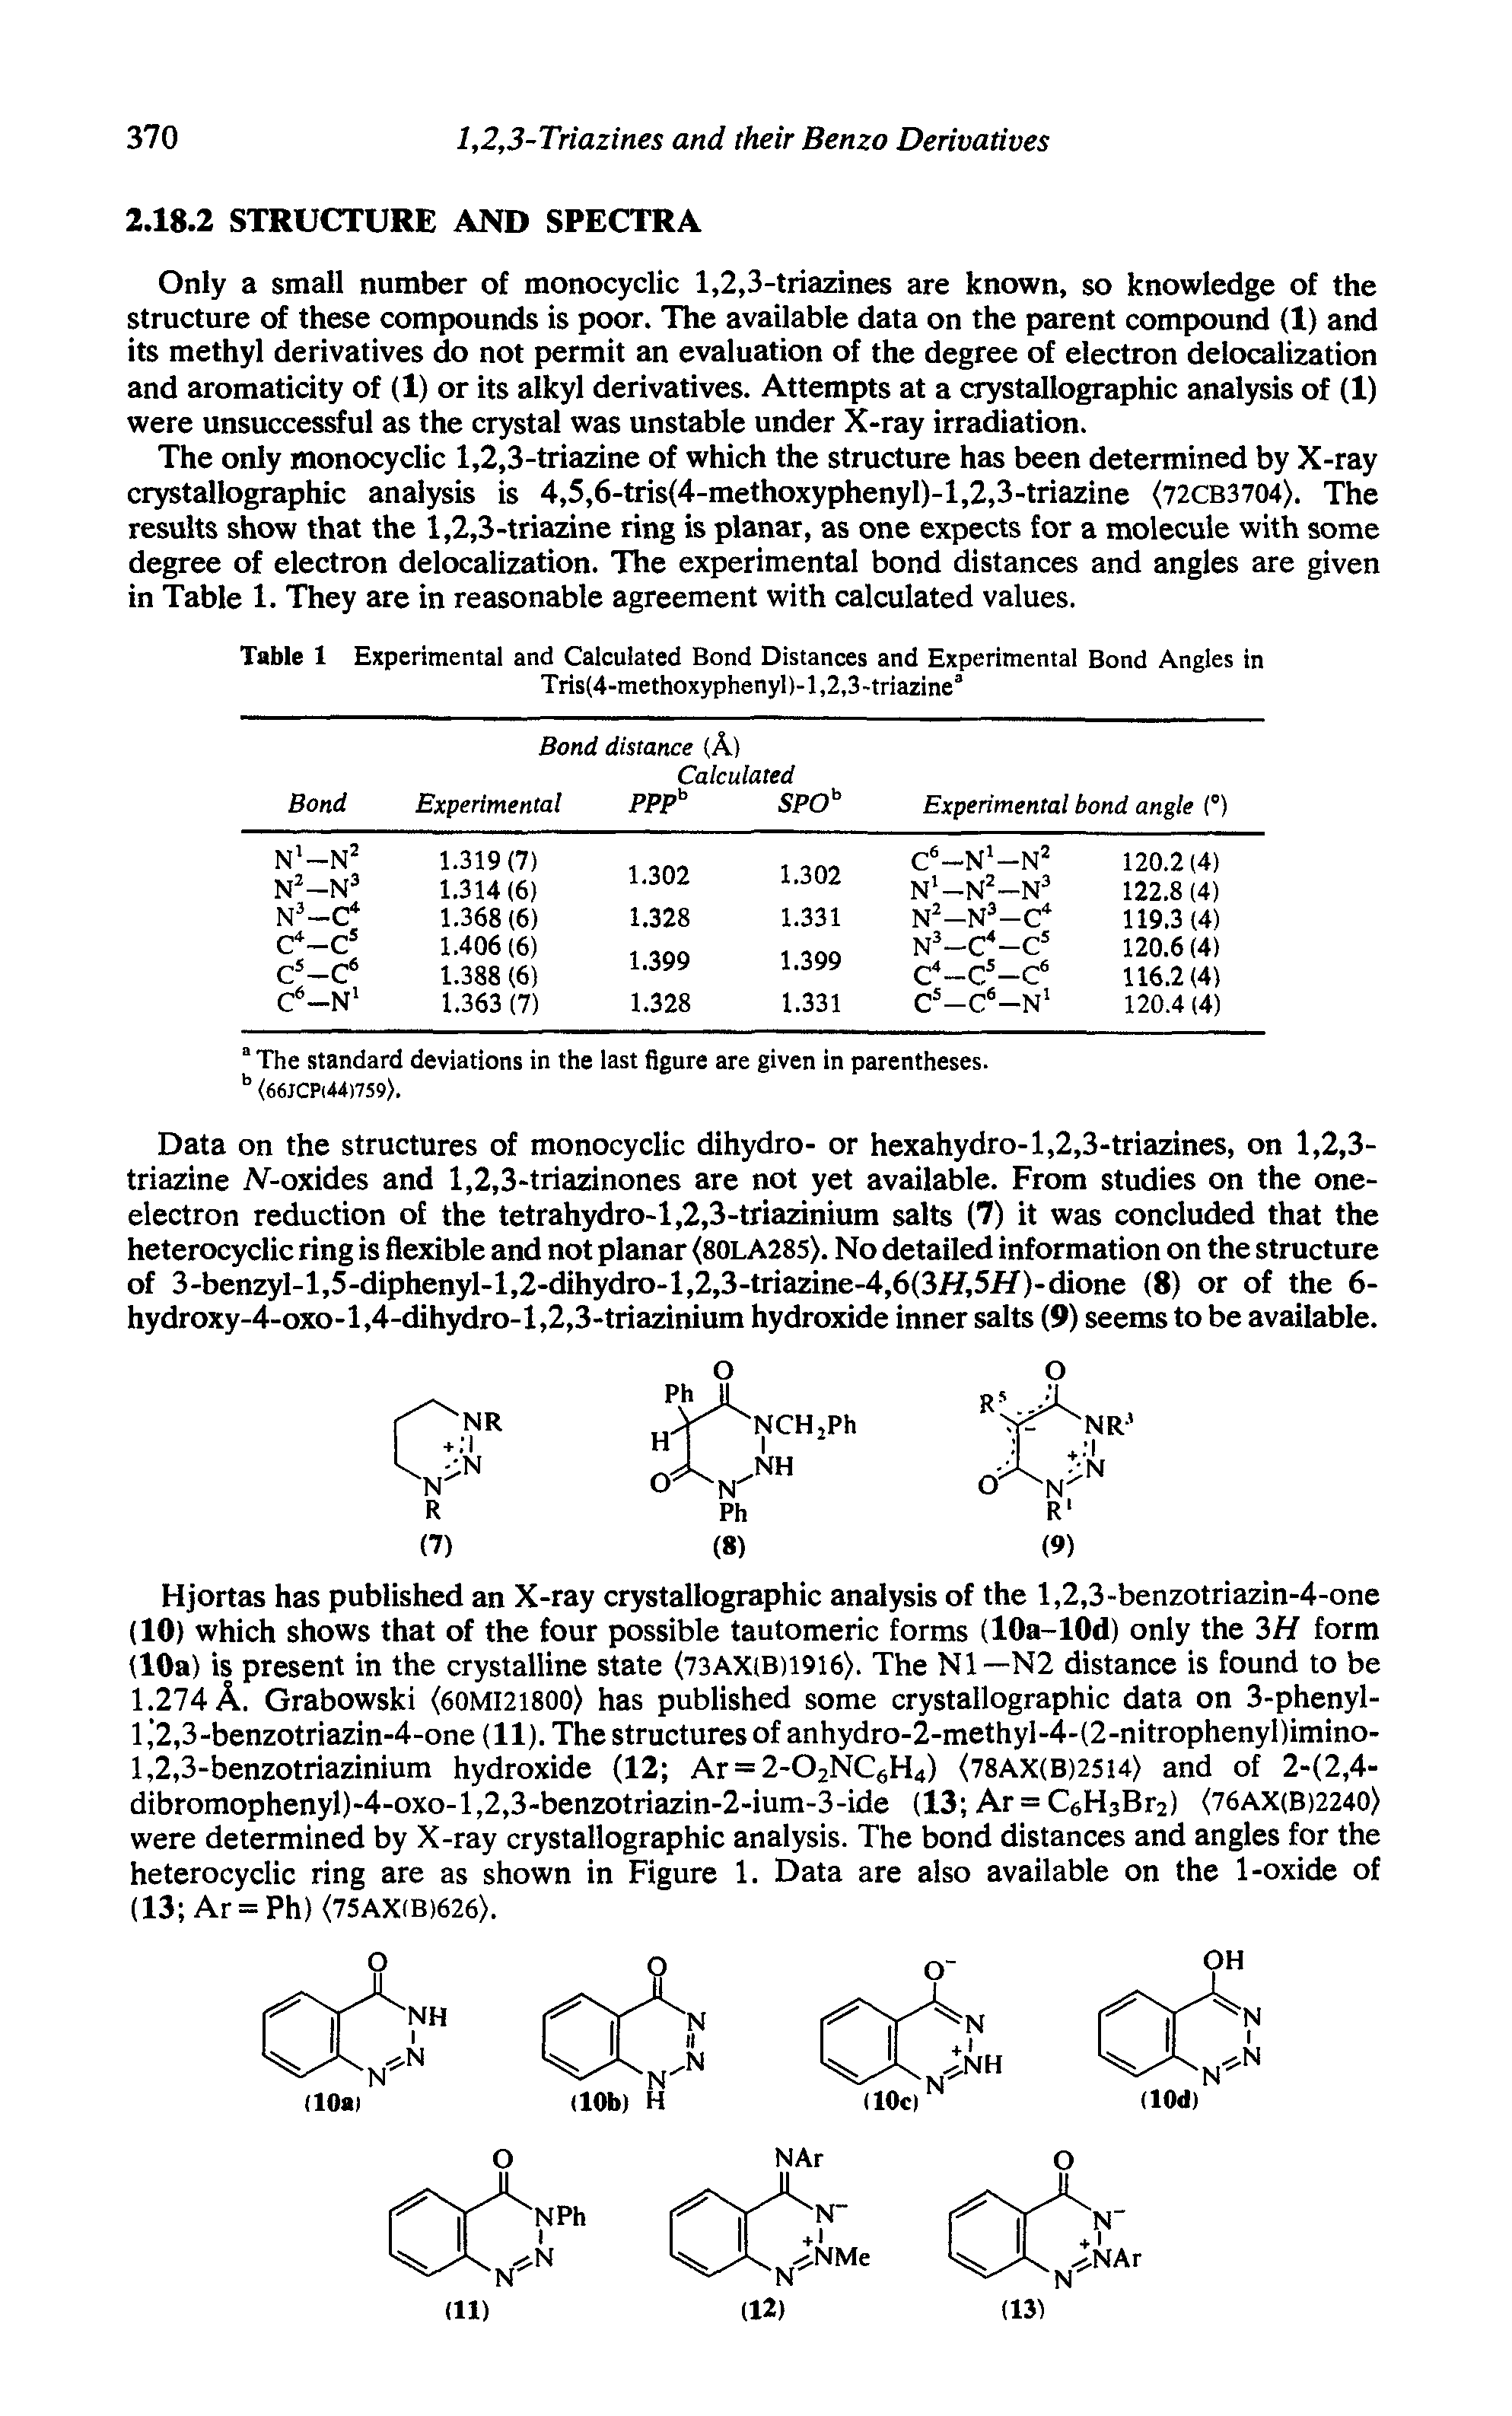 Table 1 Experimental and Calculated Bond Distances and Experimental Bond Angles in Tris(4-methoxyphenyl)-l,2,3-triazine3...